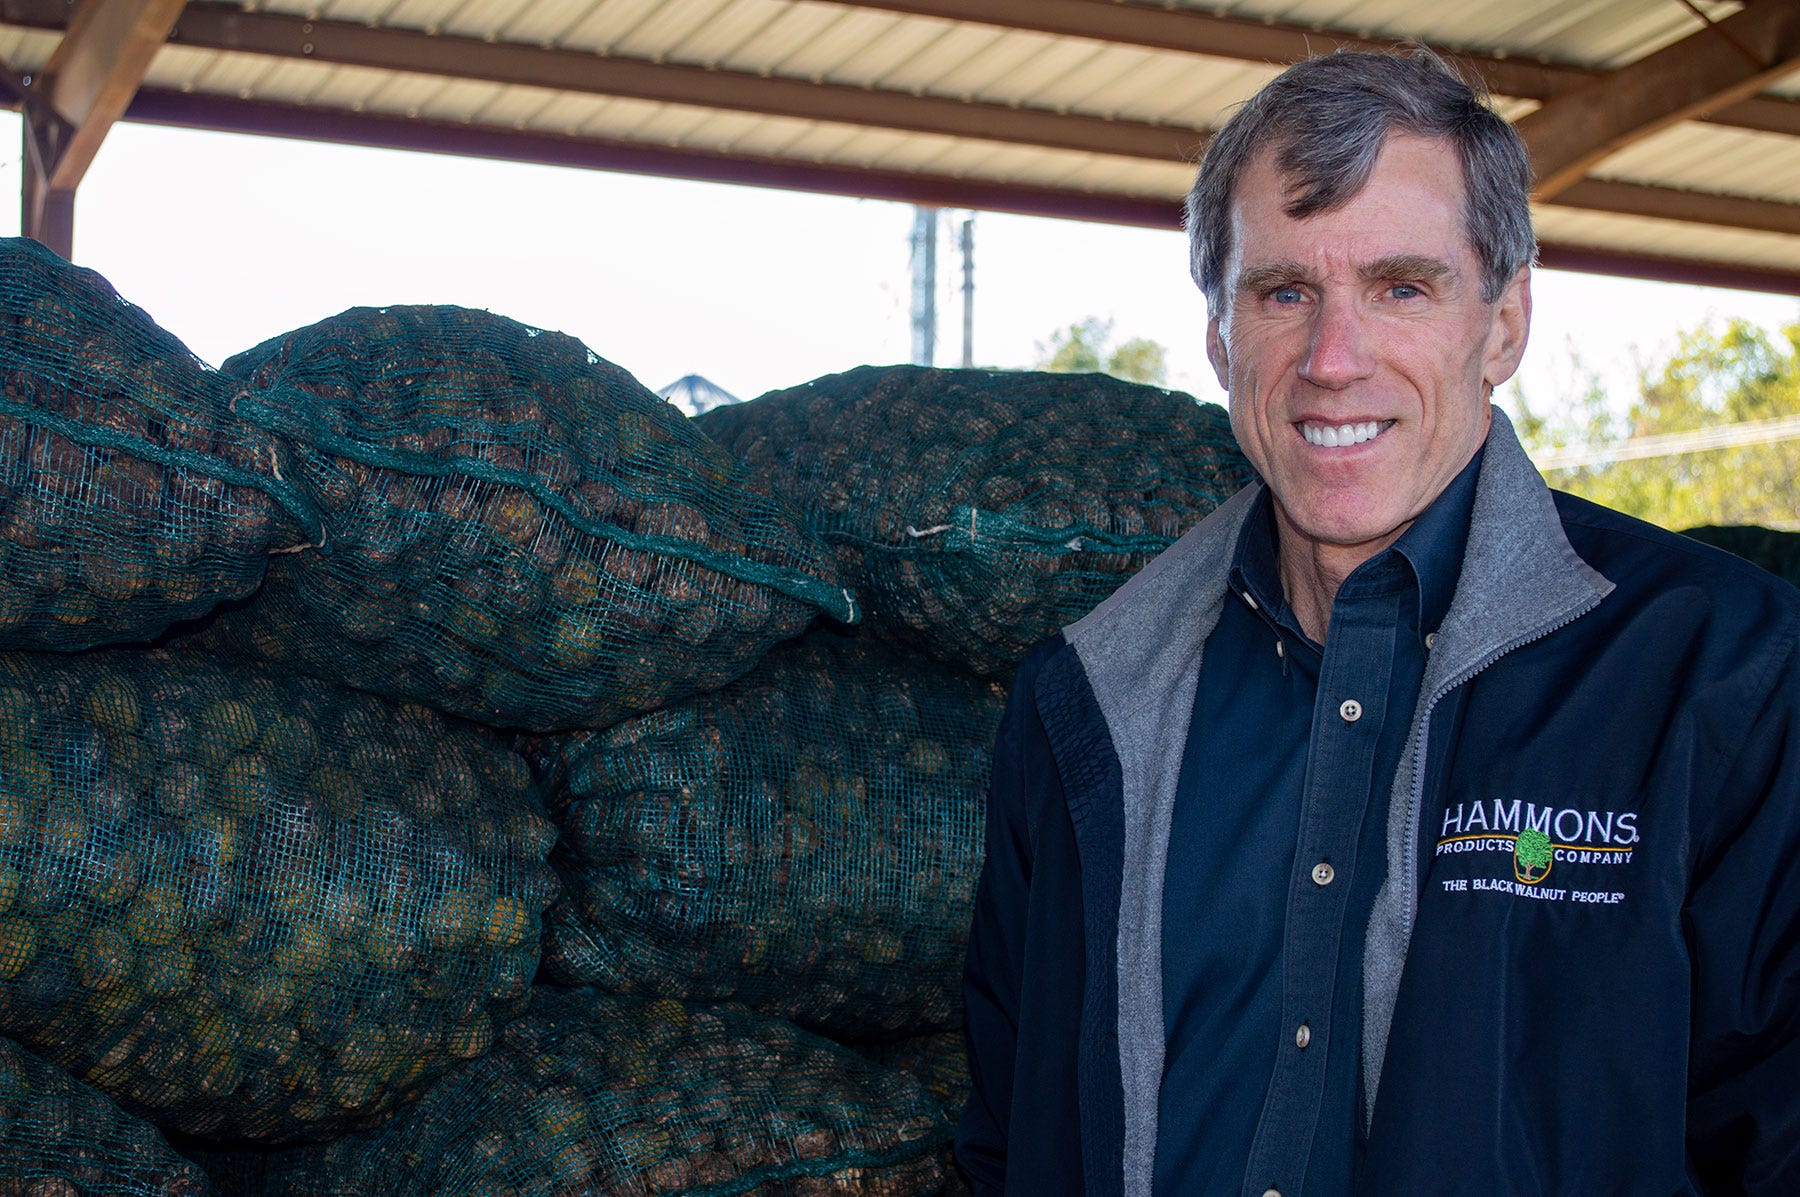 Joann Pipkin - Brian Hammons smiling with bags of walnuts stacked behind him